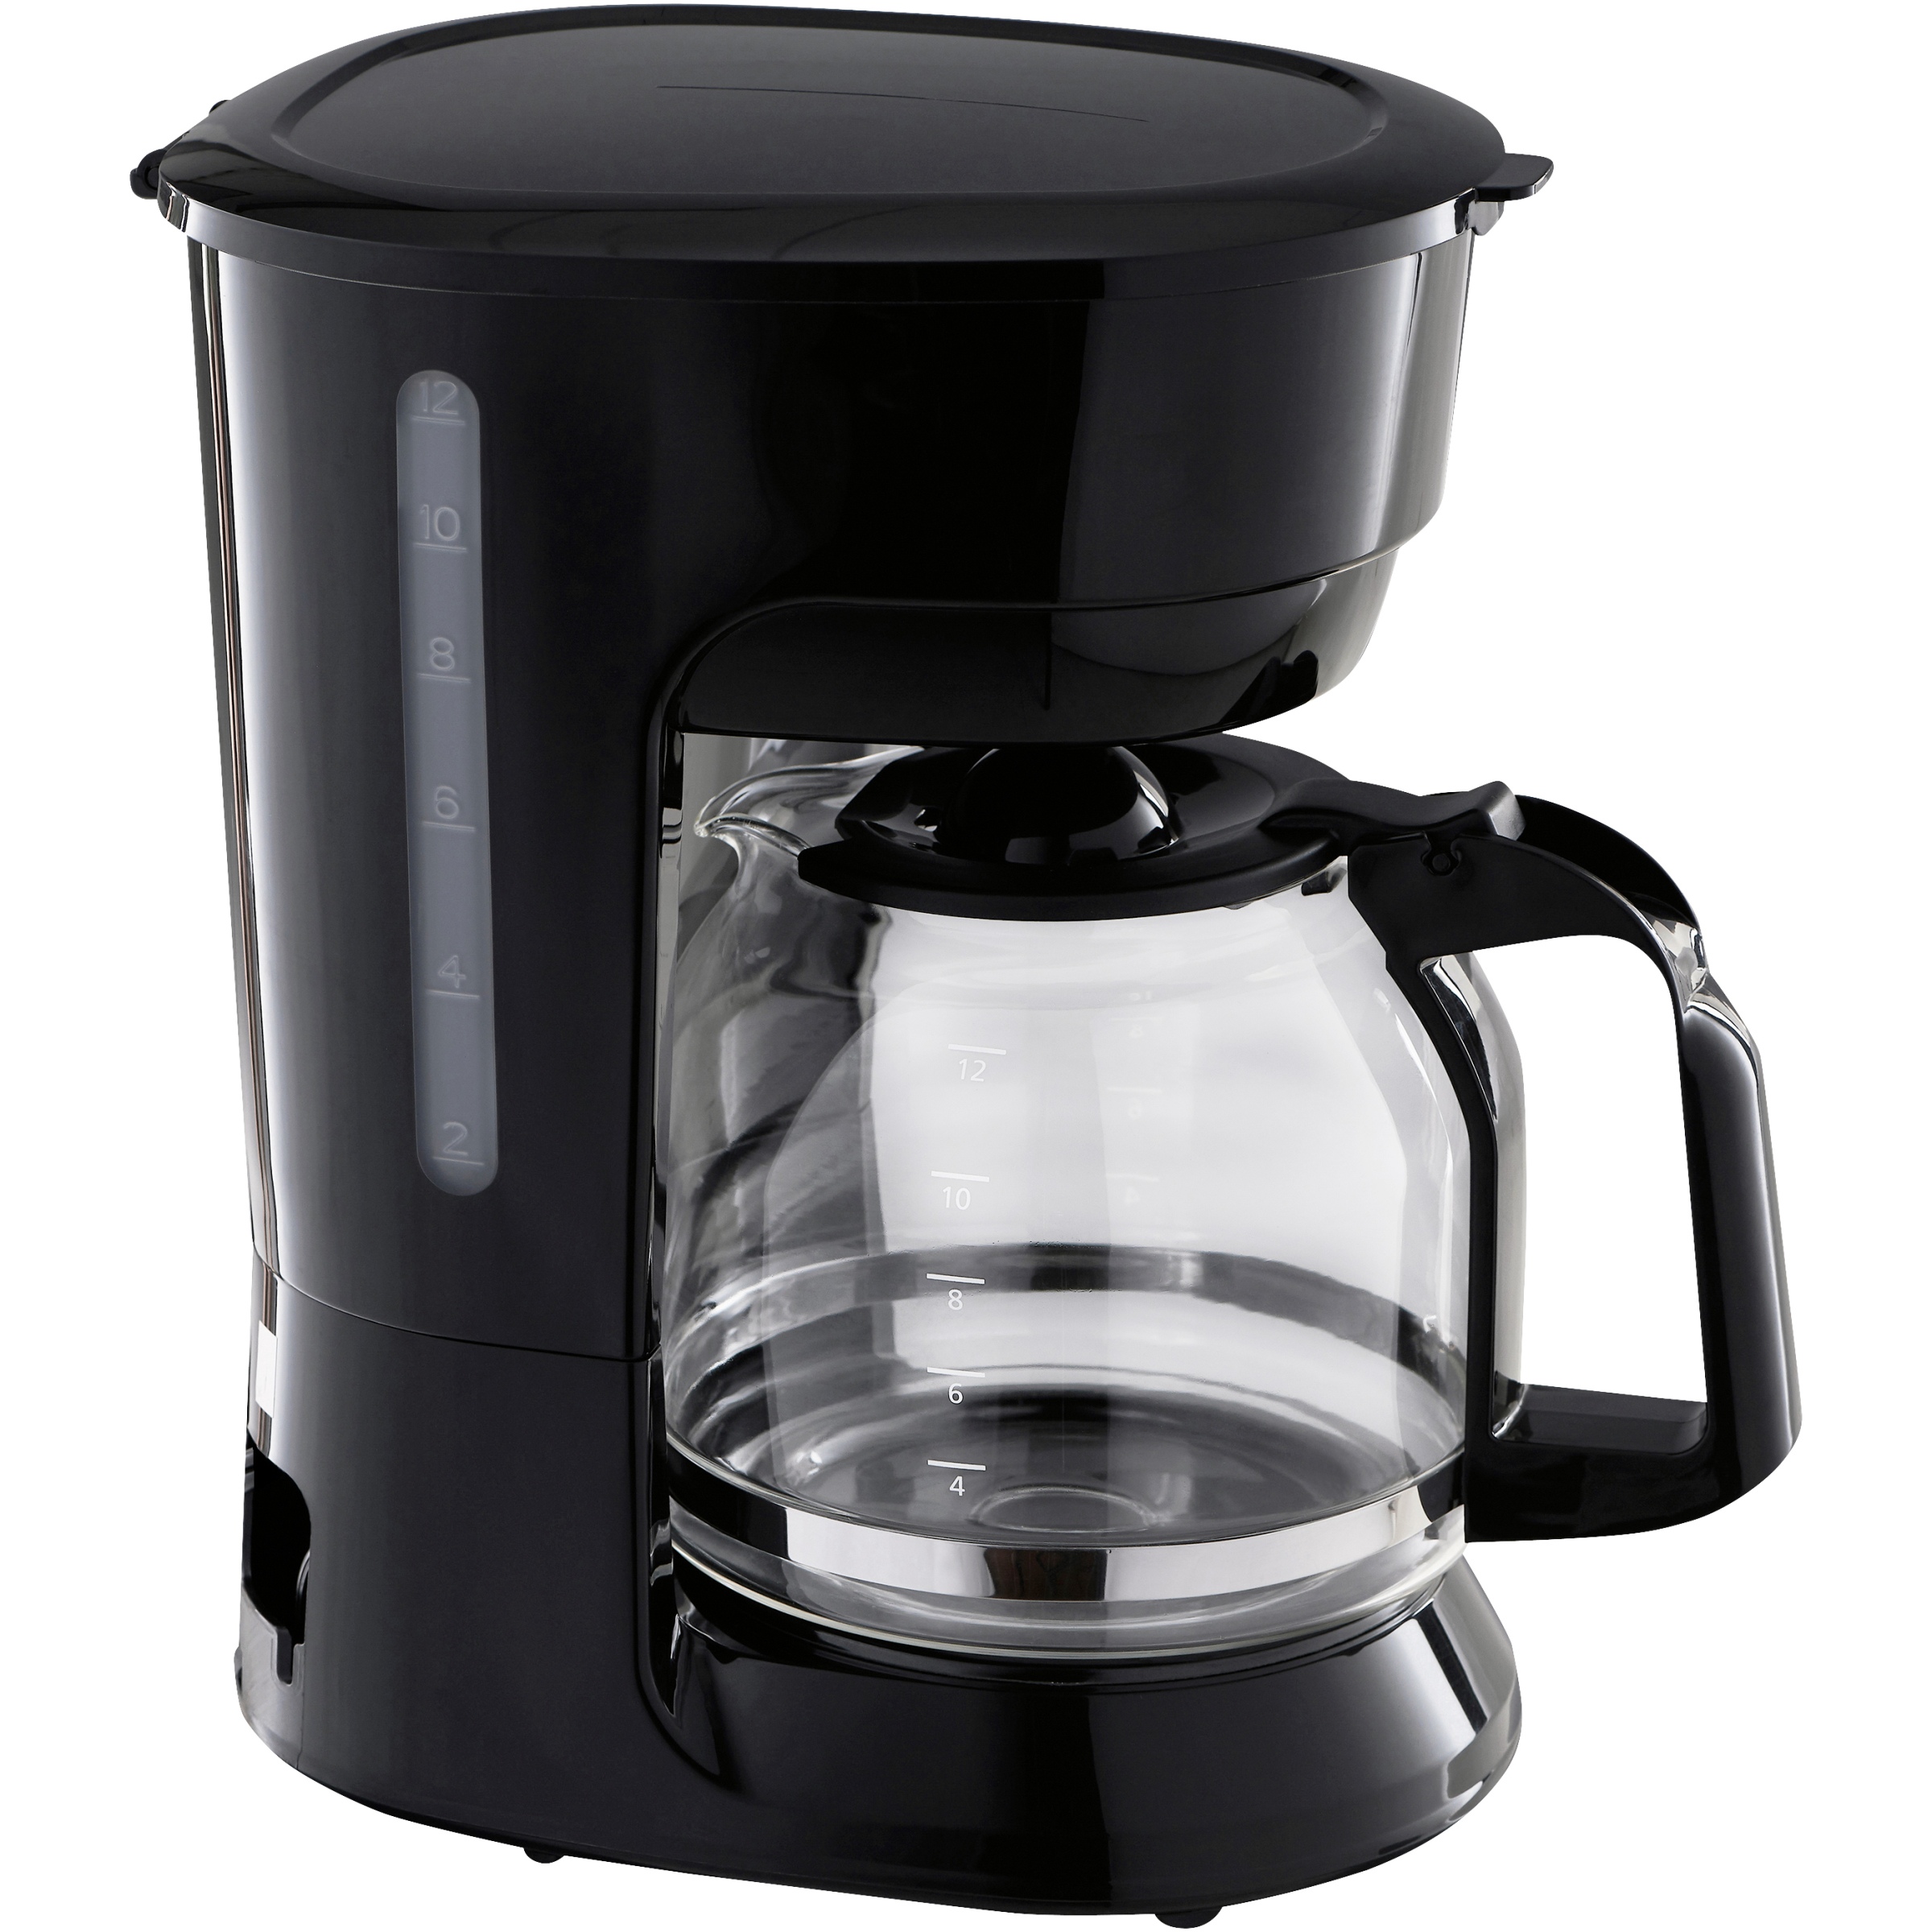 Mainstays Black 12-Cup Coffee Maker with Removable Filter Basket - image 1 of 7